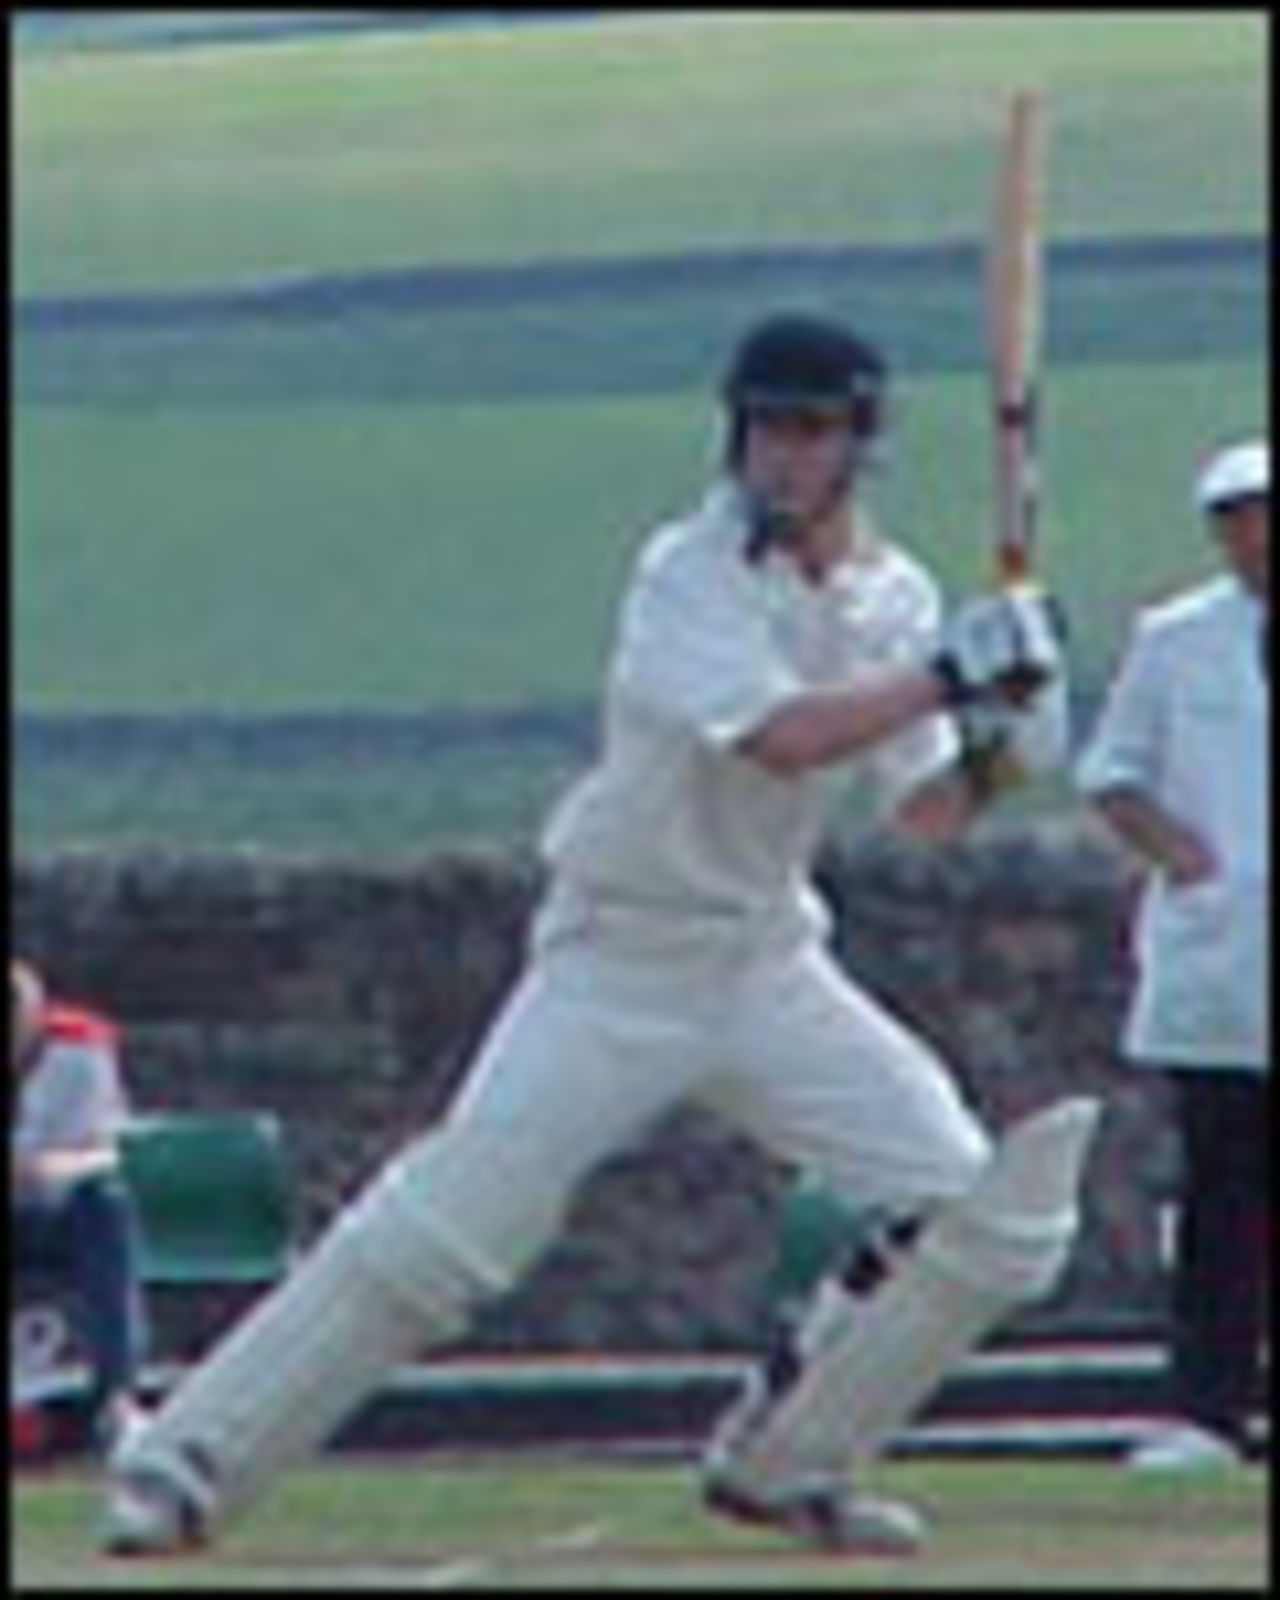 Chris Cook-Martin in action for Rawtenstall at Colne in the Worsley Cup semi final on June 22nd 2003